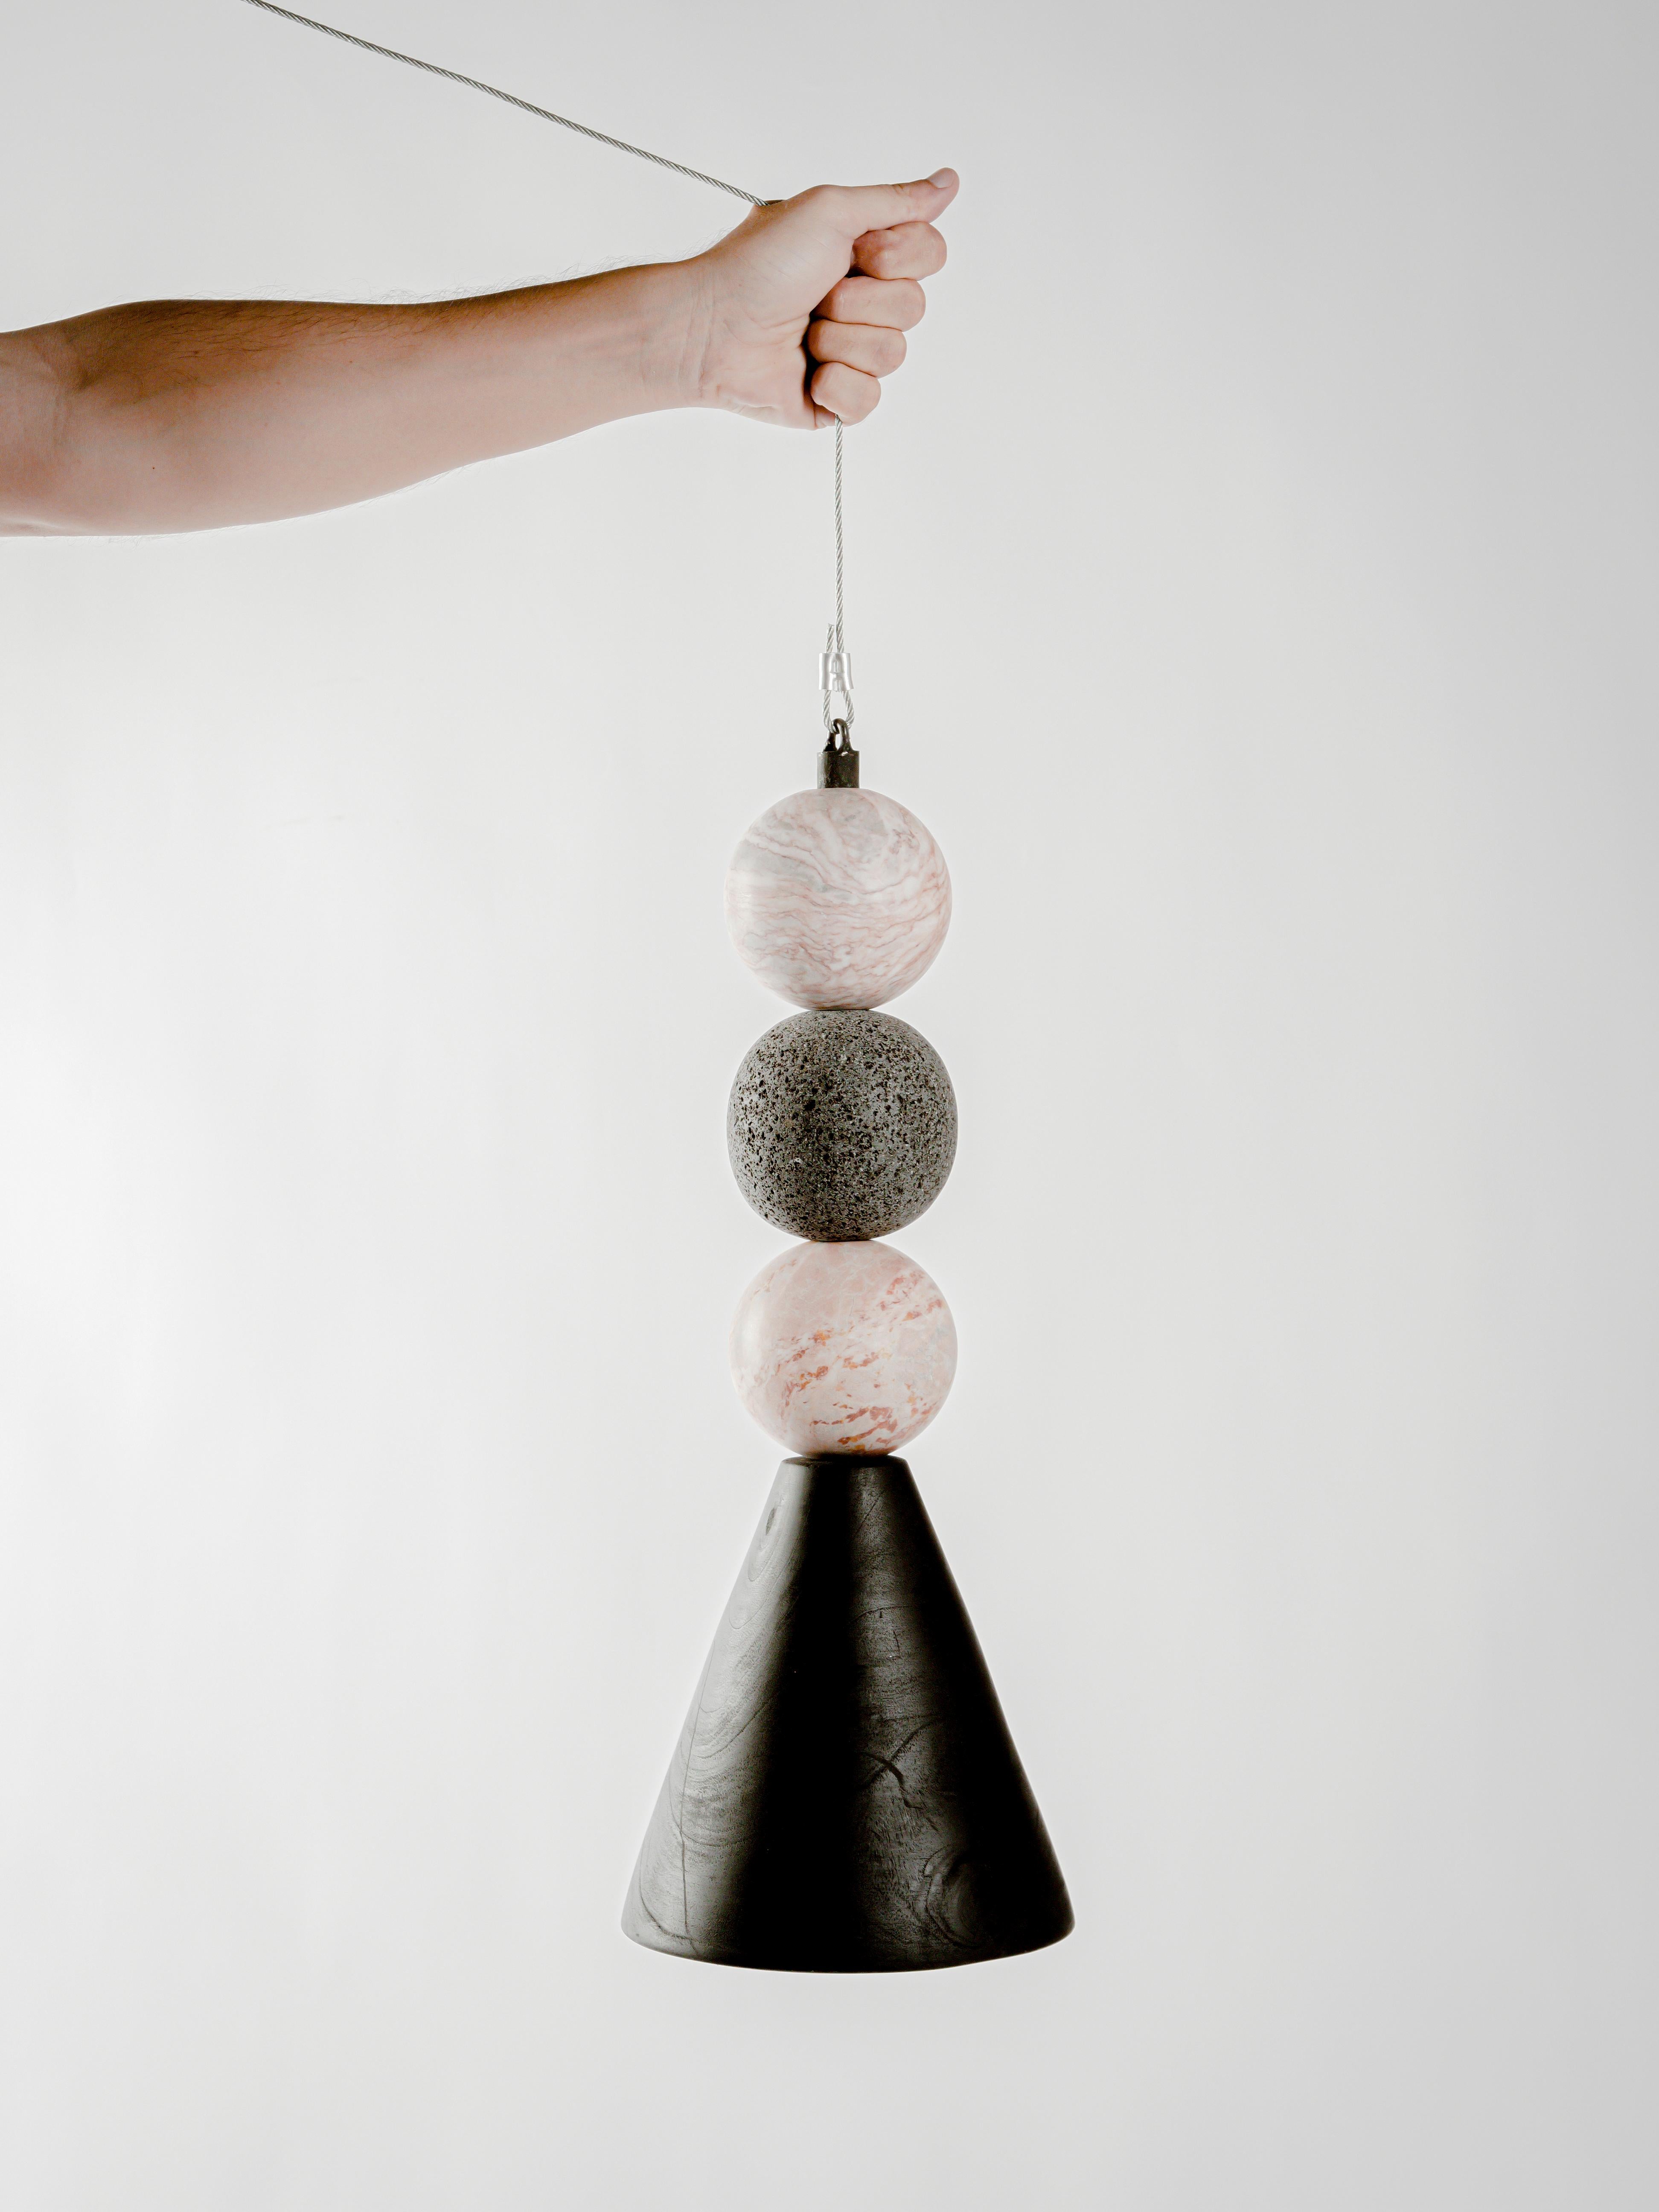 12 Lamp by Daniel Orozco
Dimensions: D 20 x H 50 cm.
Materials: Wood, Volcanic Stone.

Hanging lamp with conical burn wooden base, 2 pink marble spheres and 1 volcanic stone.

All our lamps can be wired according to each country. If sold to the USA